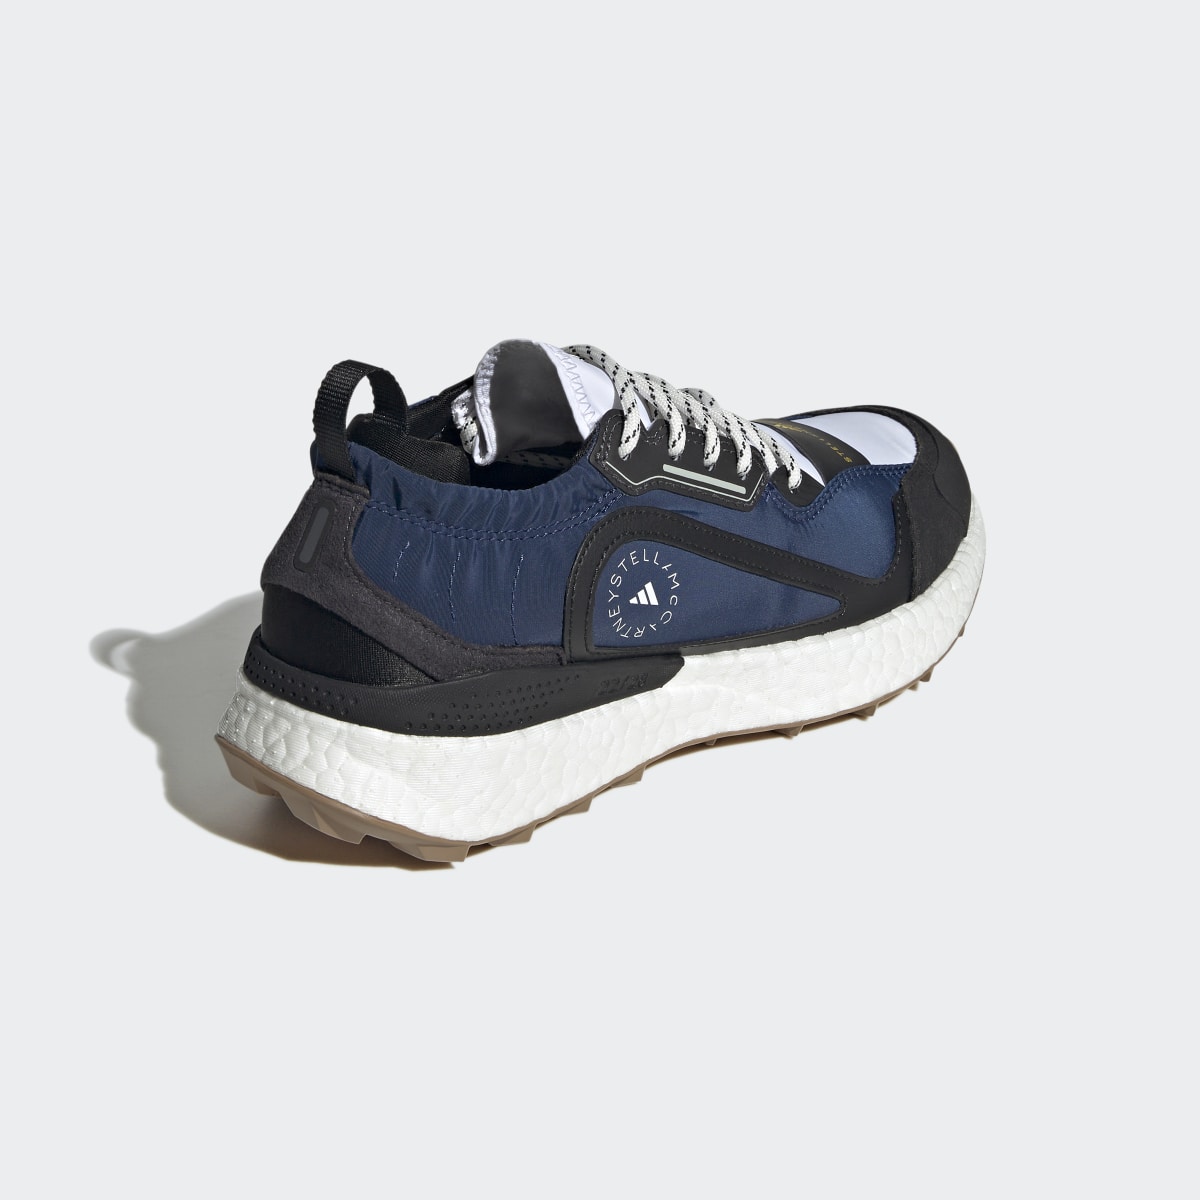 Adidas by Stella McCartney Outdoorboost 2.0 COLD.RDY Laufschuh. 6